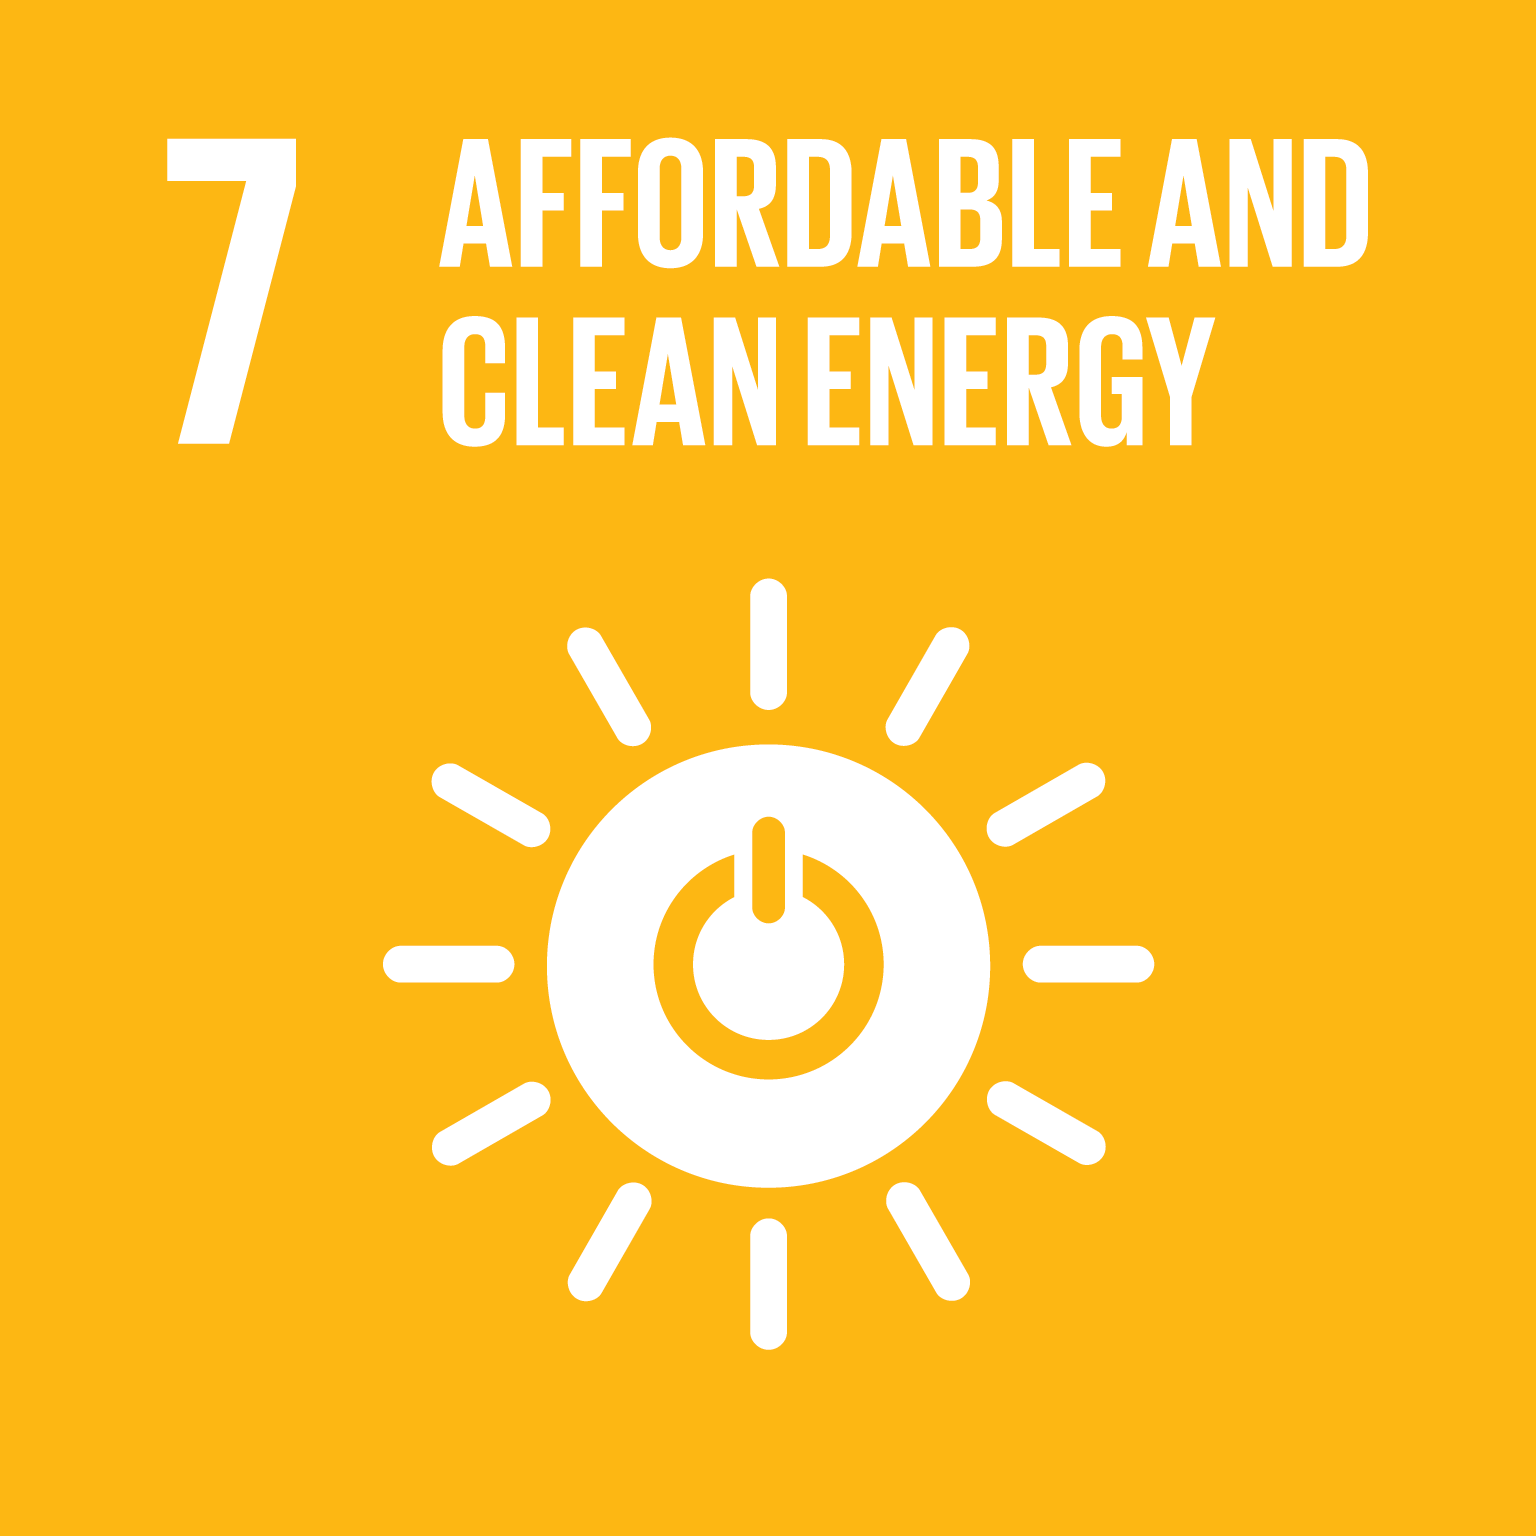 Goal 7: Affordable Clean Energy, the text of this infographic is listed below